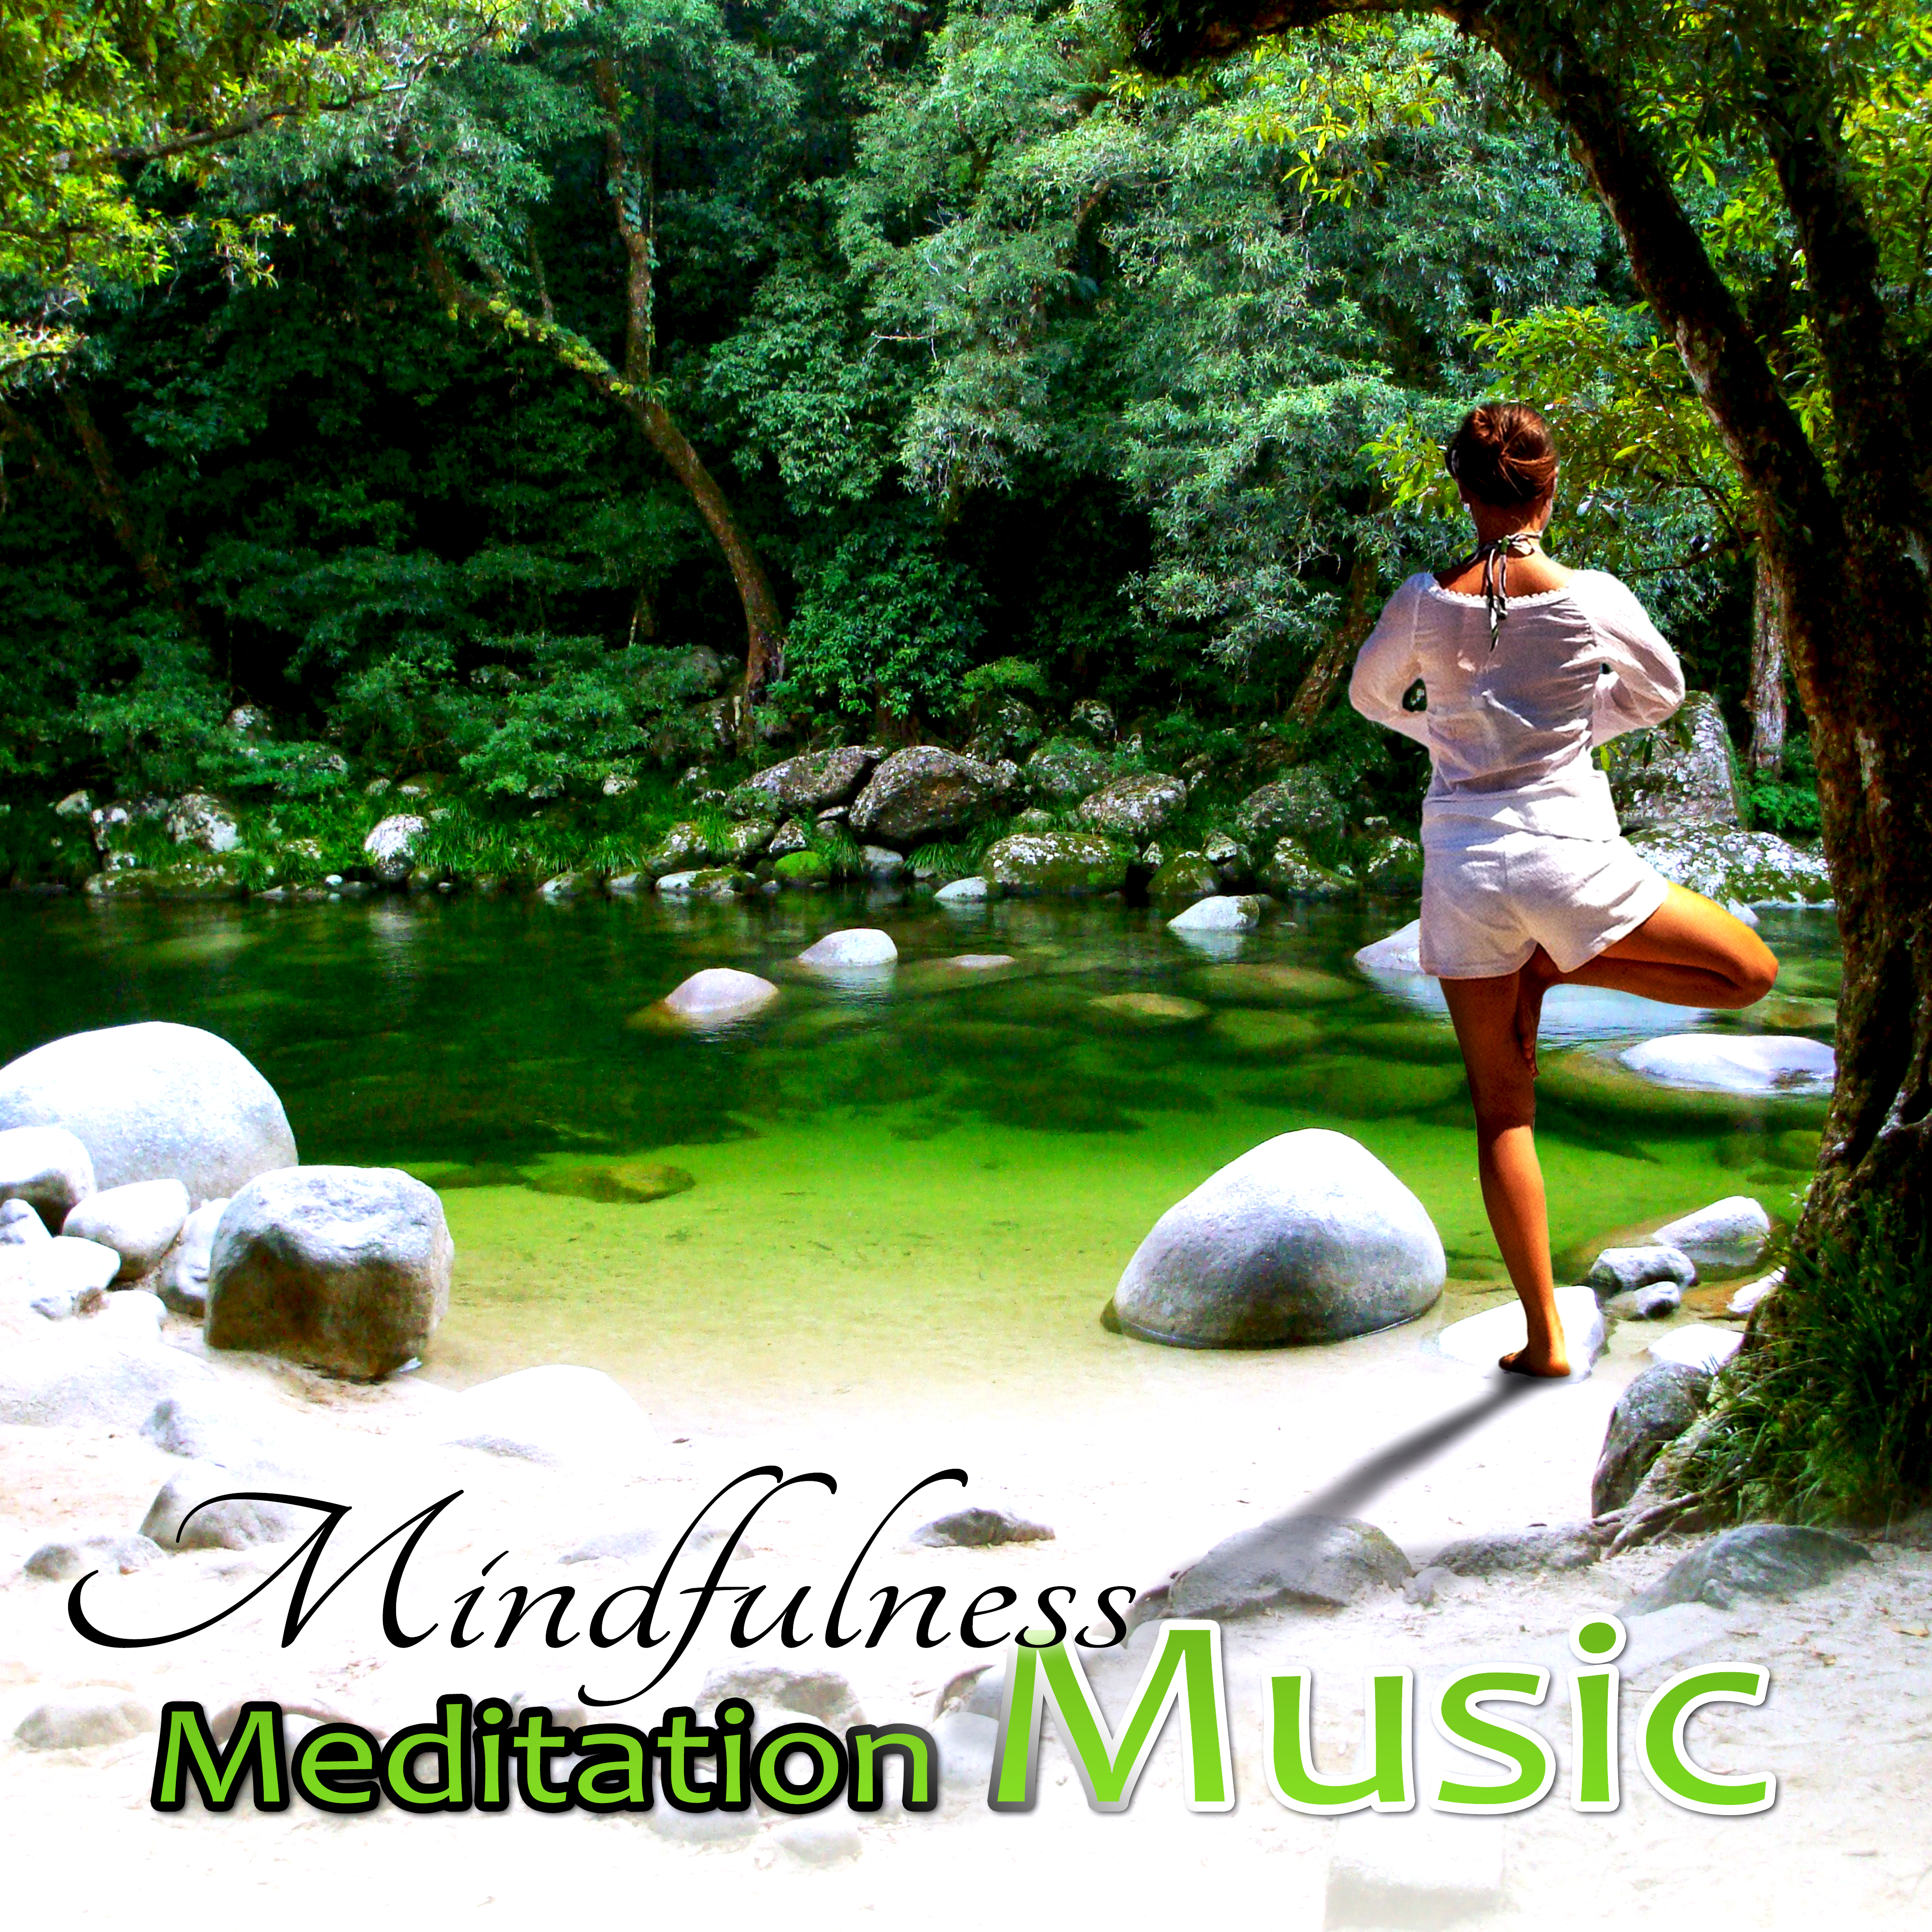 Mindfulness Meditation Music Exercises  Relaxing Music with Soothing Nature Sounds for Yoga Classes, White Noise for Relaxation